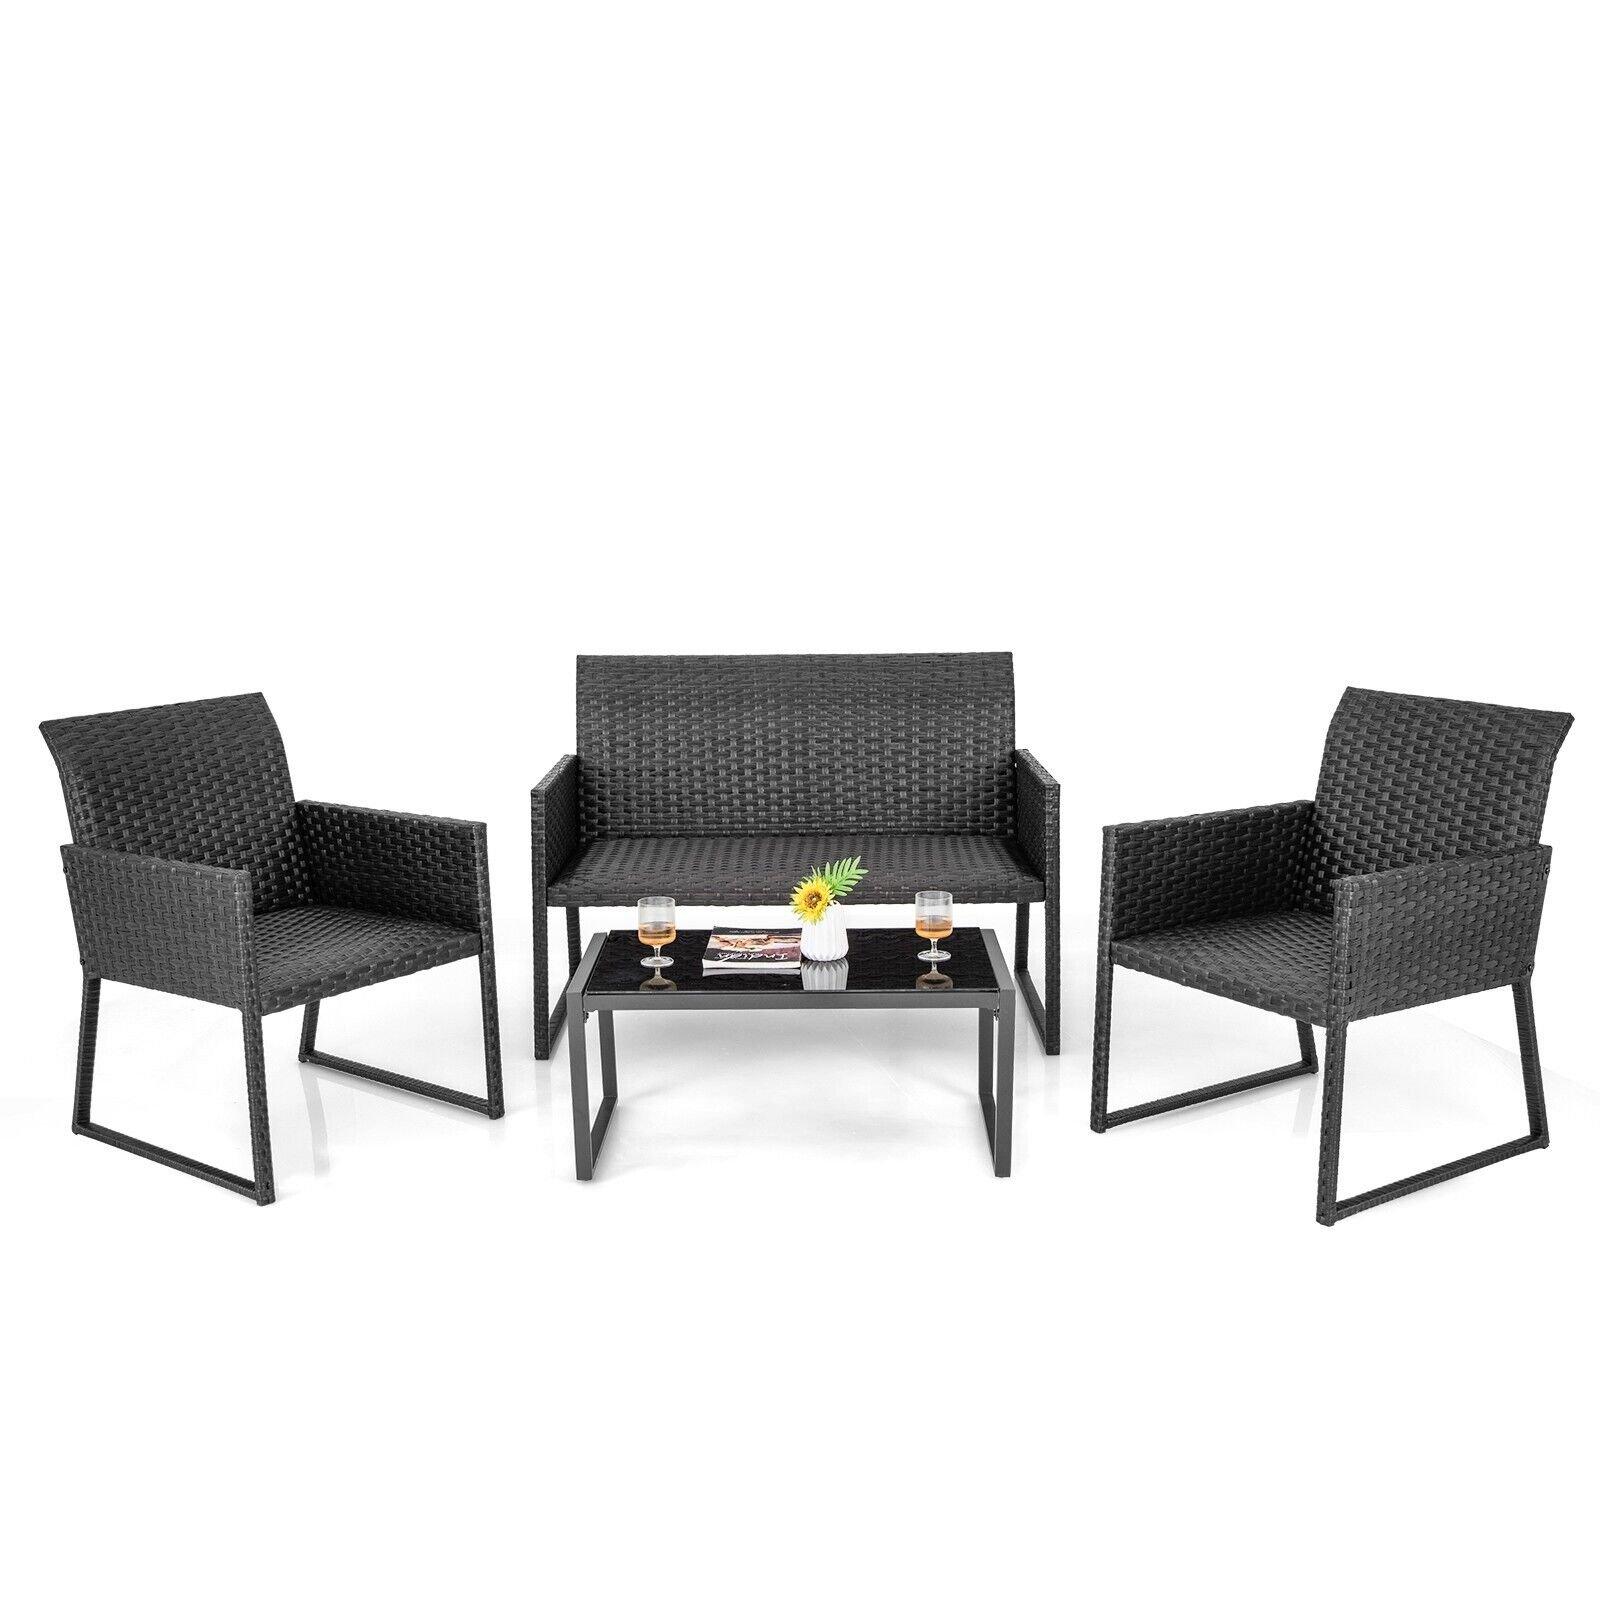 4 Pcs Wicker Patio Furniture Set Outdoor Conversation Set W/Tempered Glass Table